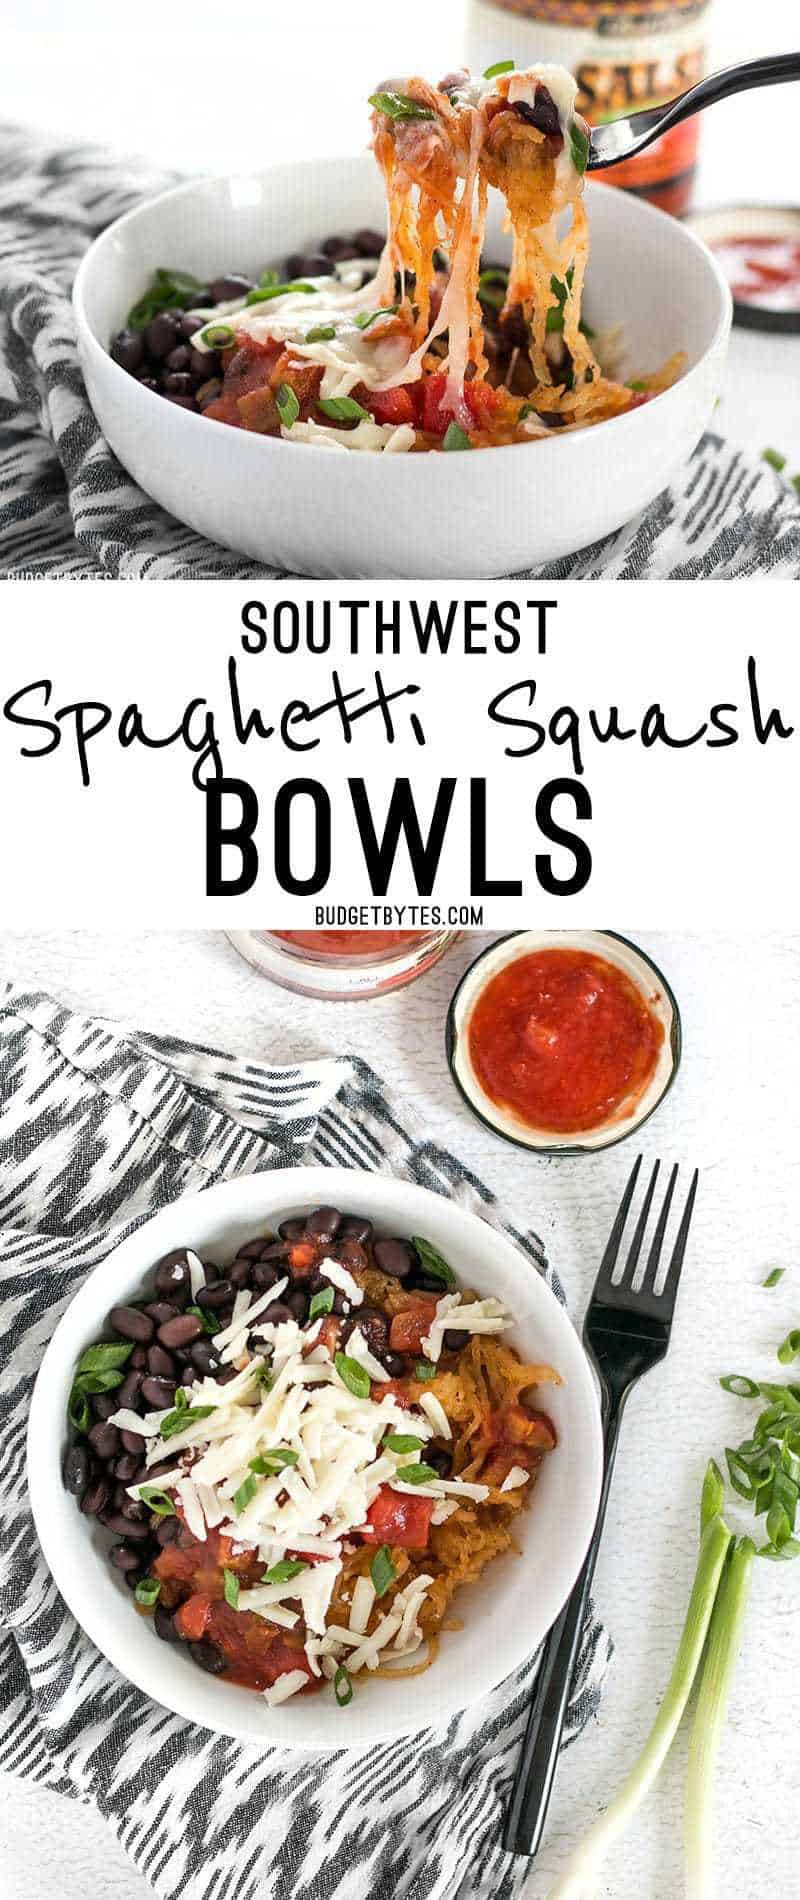 Spaghetti squash makes a great fiber-filled low-carb substitute for rice in these Southwest Spaghetti Squash Bowls. BudgetBytes.com